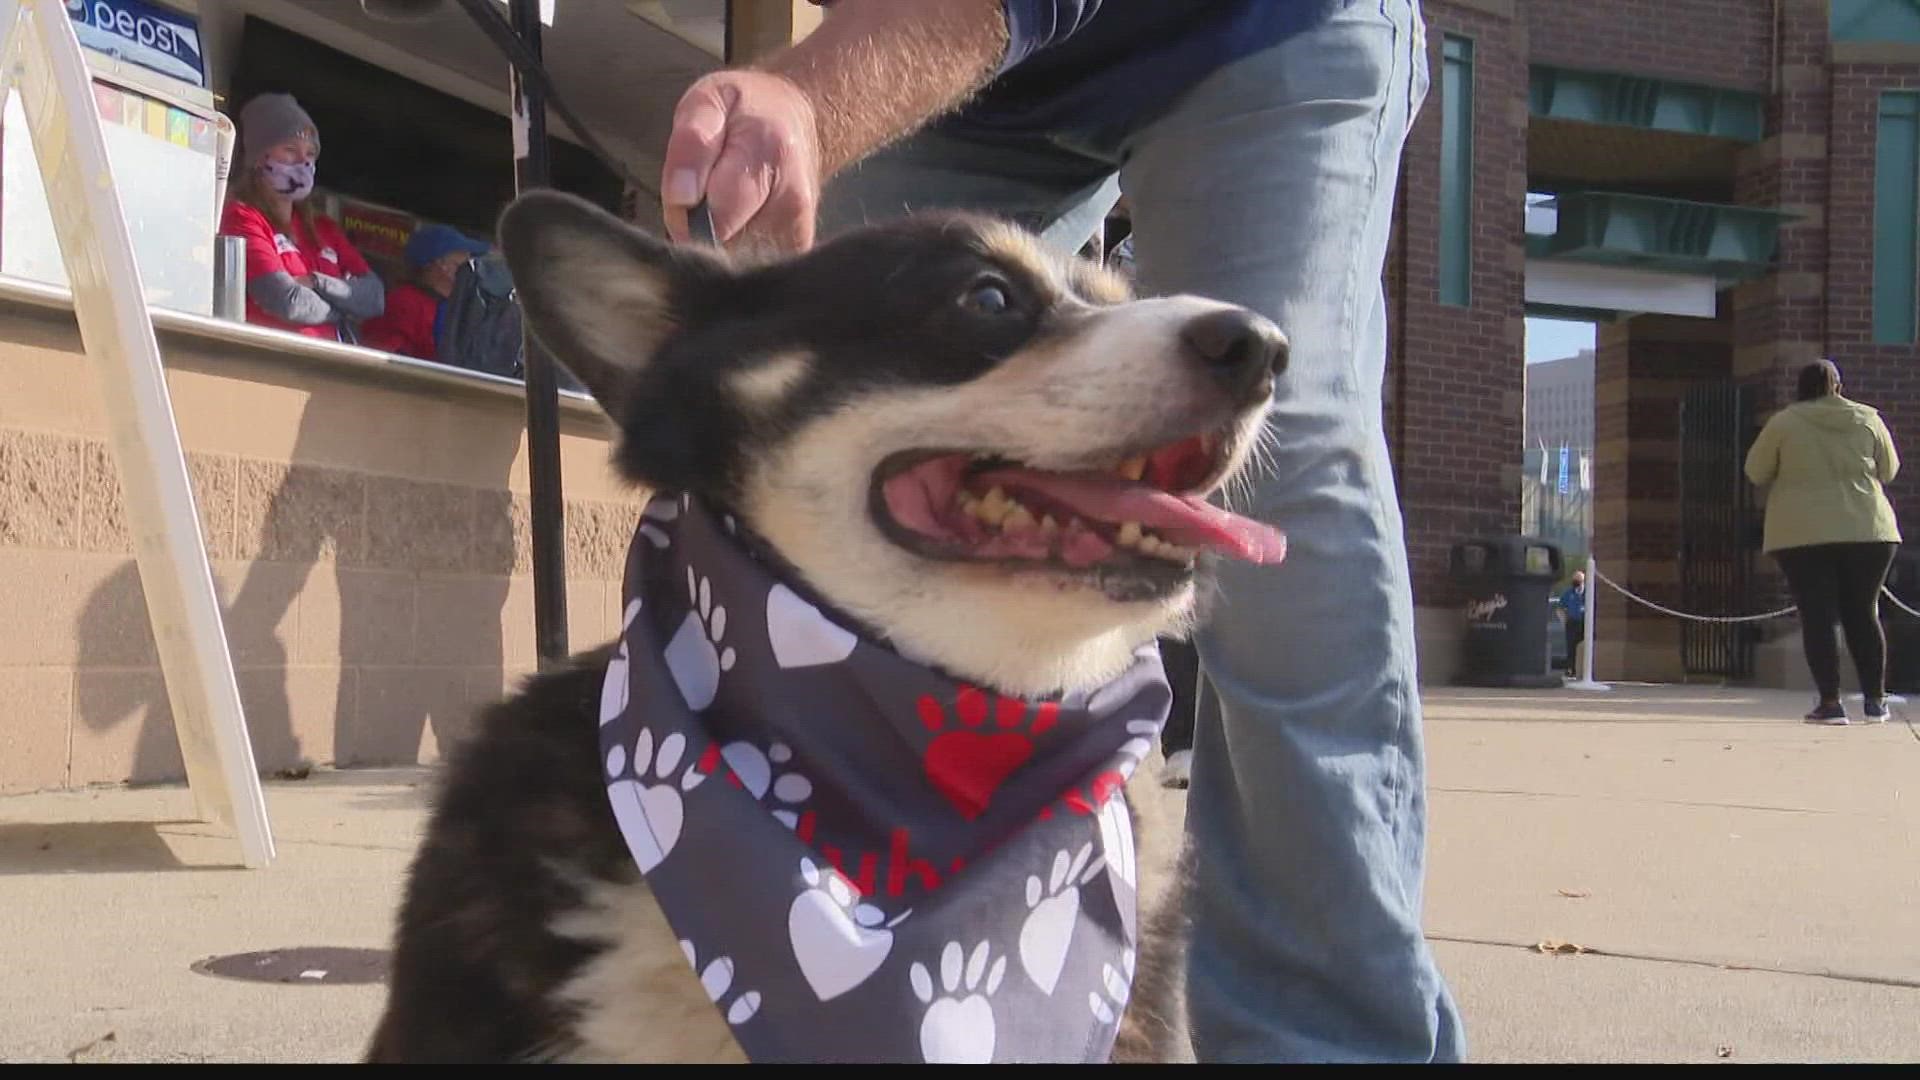 More than 1,000 people and their pups attended the 18th annual event held at Victory Field on Saturday.